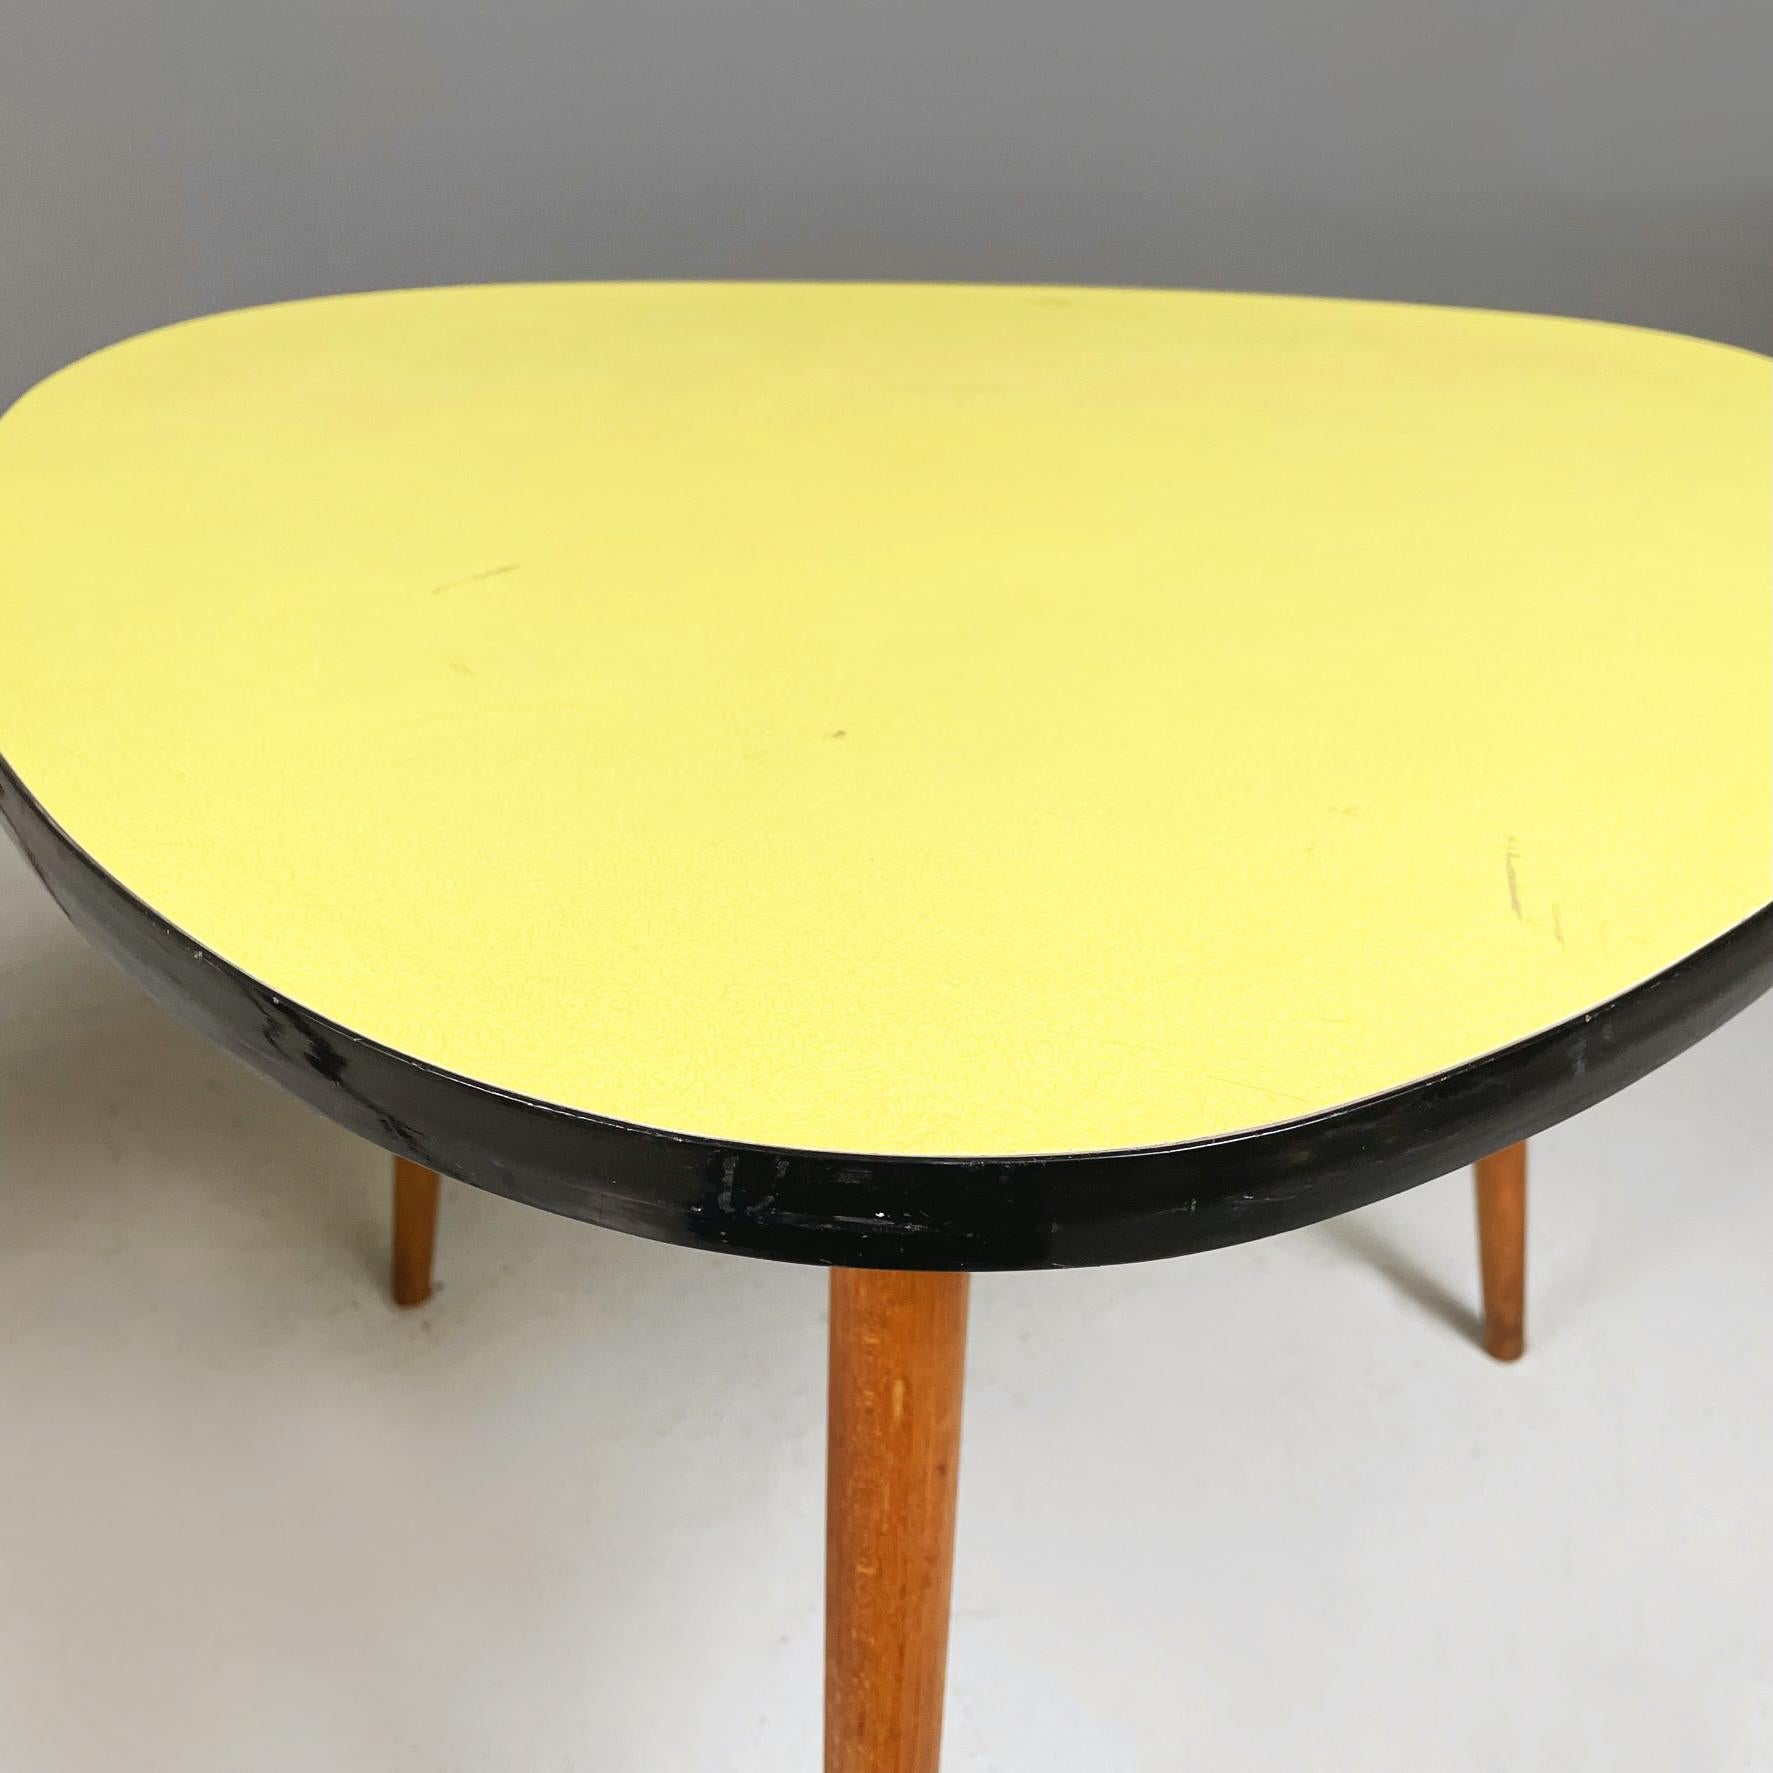 Mid-Century Modern Northern European Midcentury Wood Yellow and Black Formica Coffee Tables, 1960s For Sale